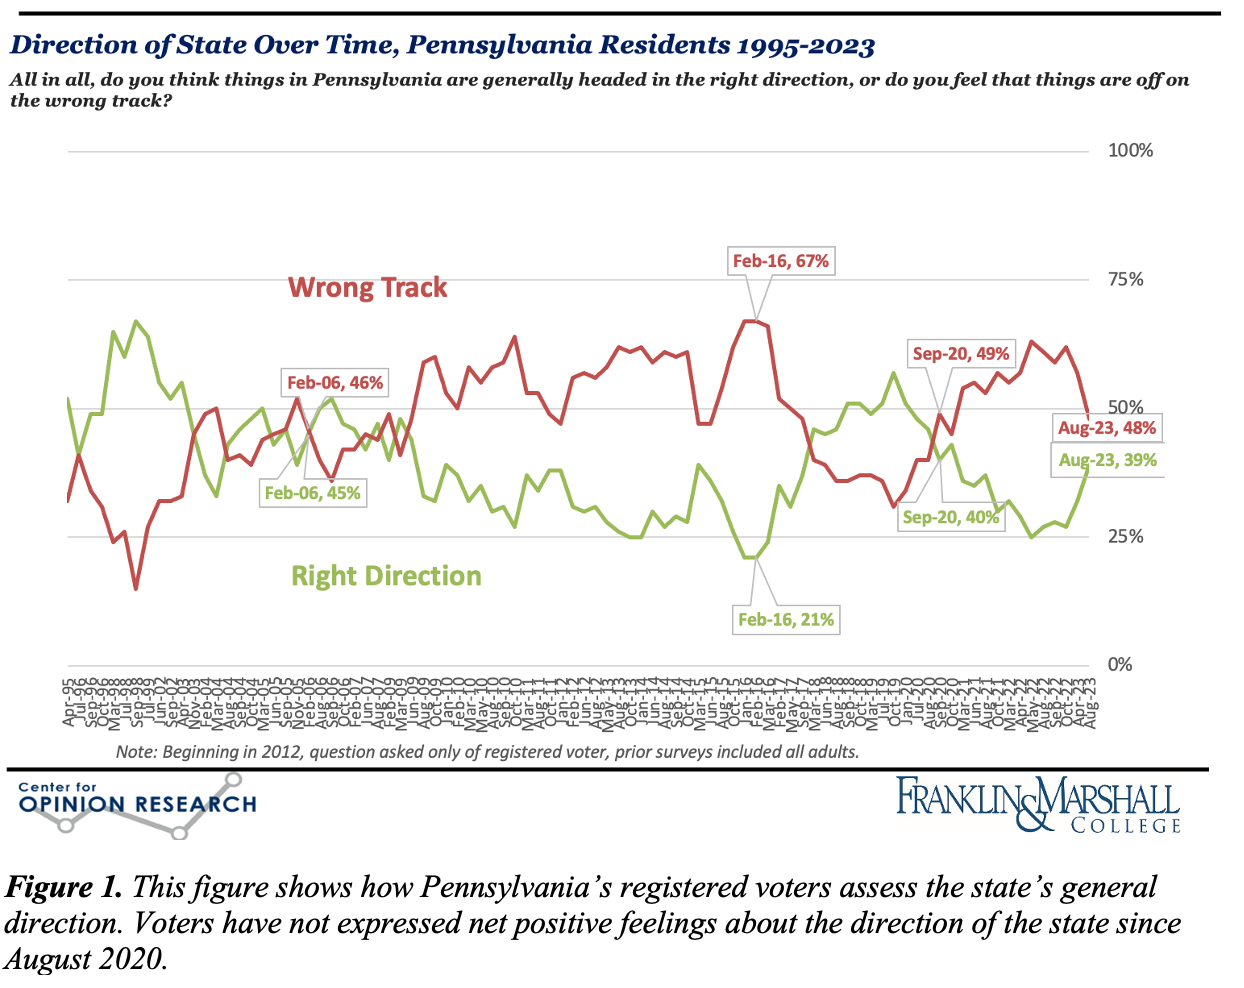 Figure 1. Line graph showing F&M Poll data on Pennsylvania voters' feelings about the direction of the state, April 1995 through August 2023. Voters have not expressed net positive feelings about the direction of the state since August 2020.